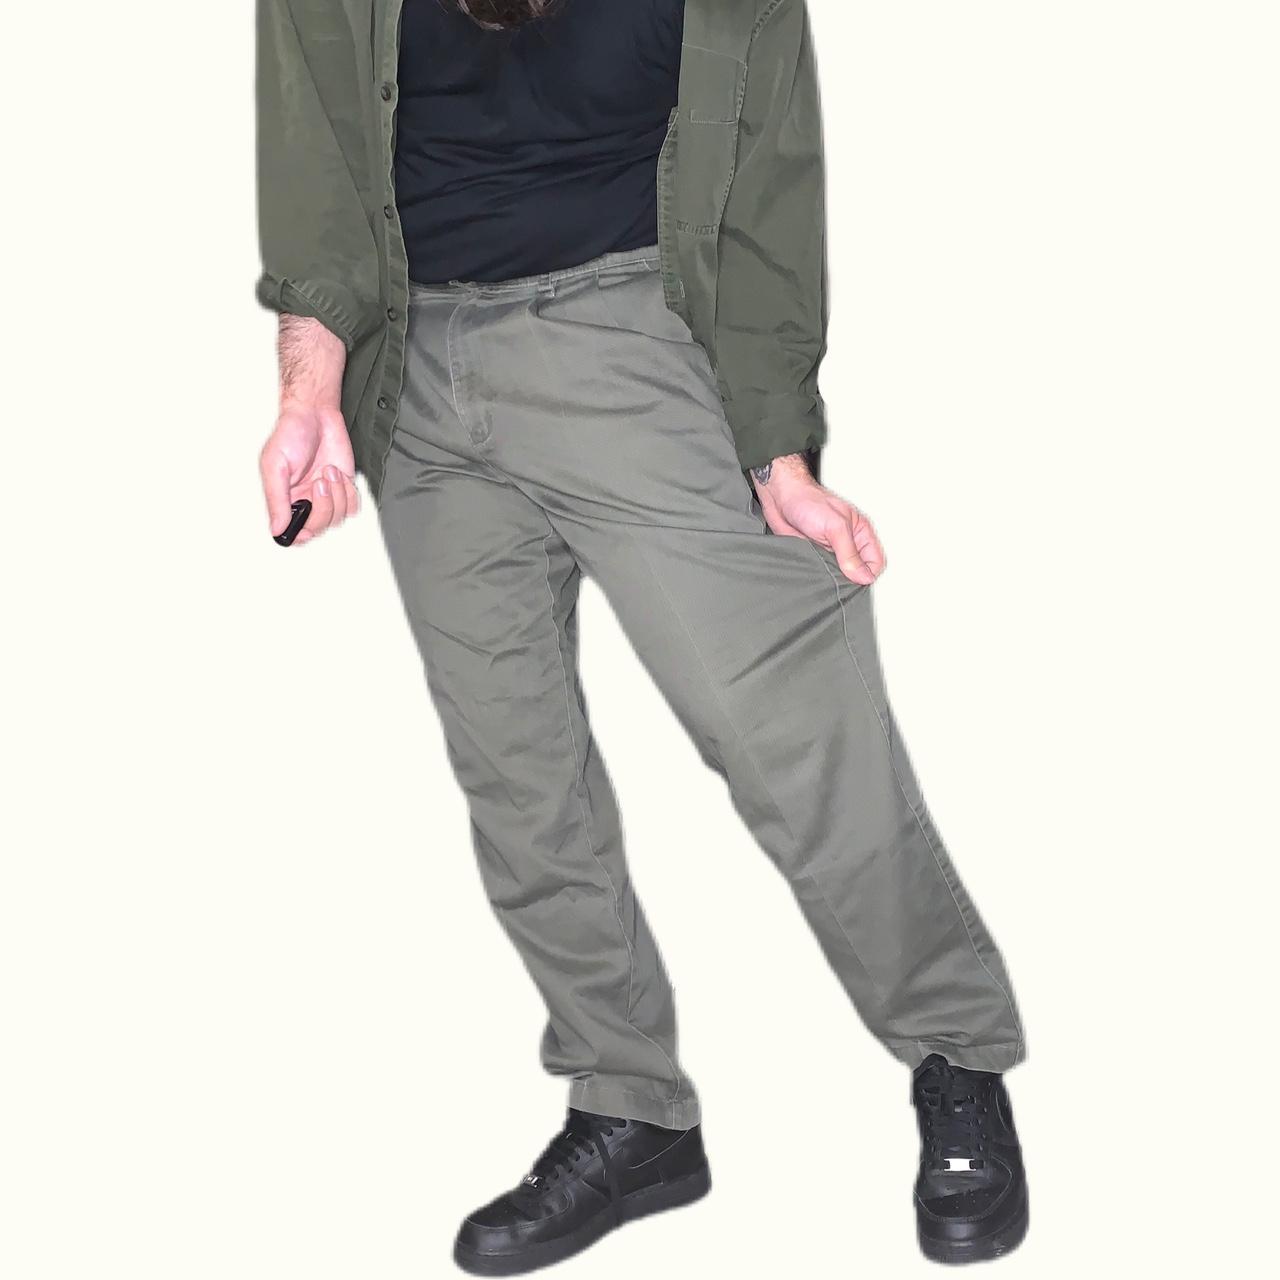 Product Image 2 - Vintage olive green dockers

Perfect pair